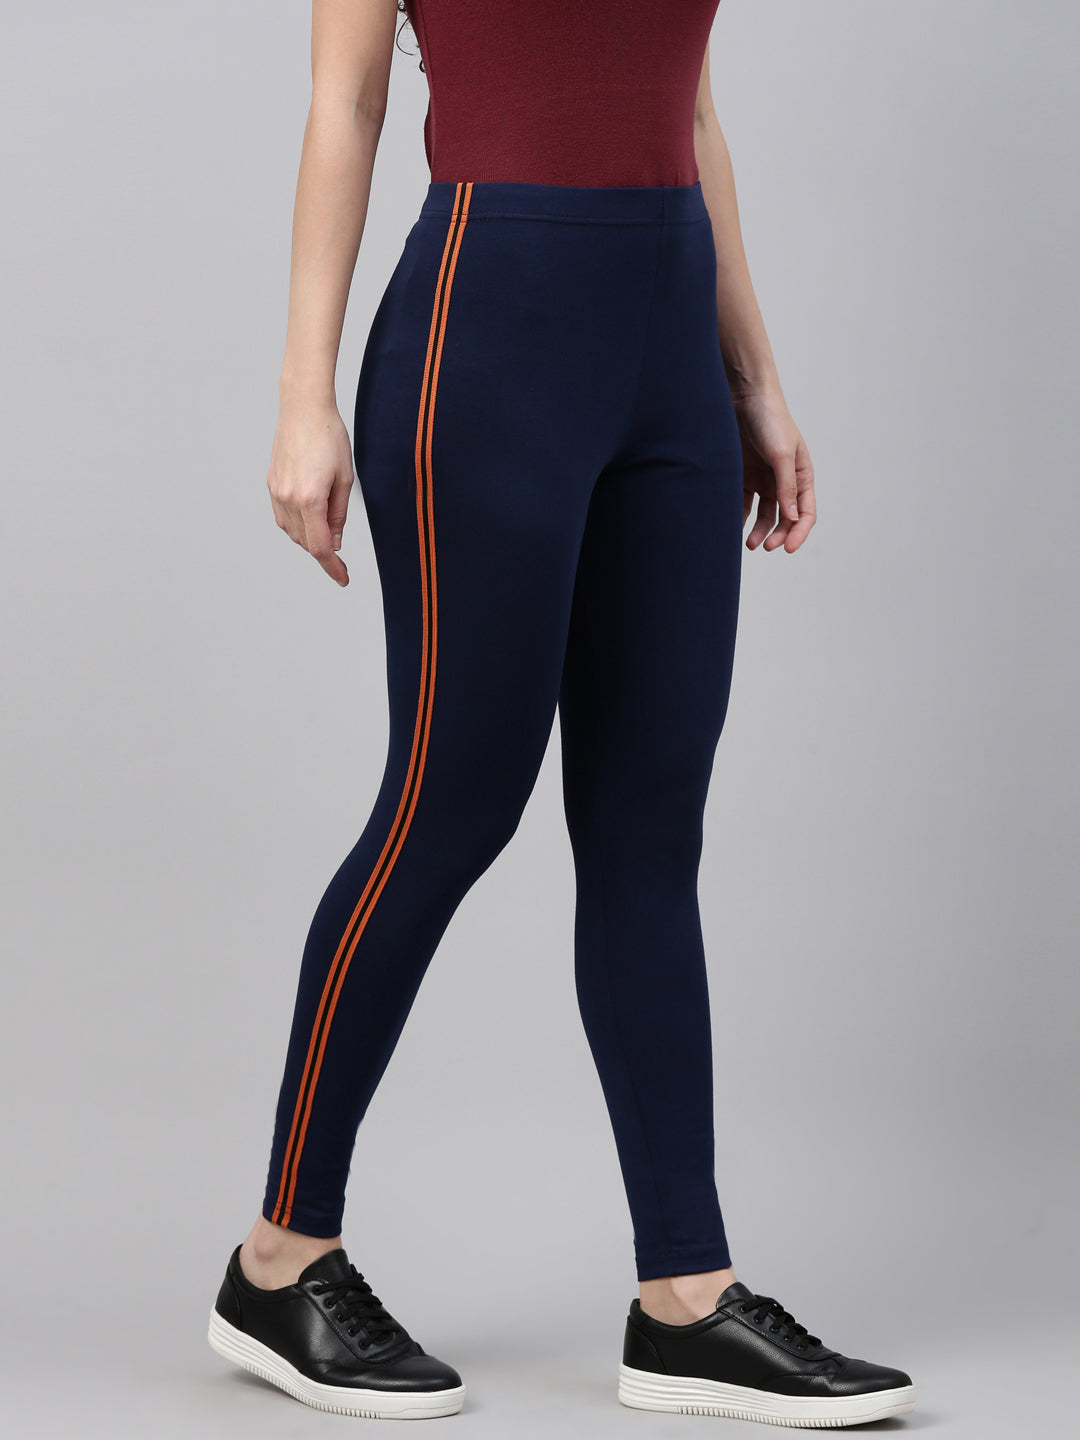 Go Colors Antra Melange Legging in Chennai at best price by